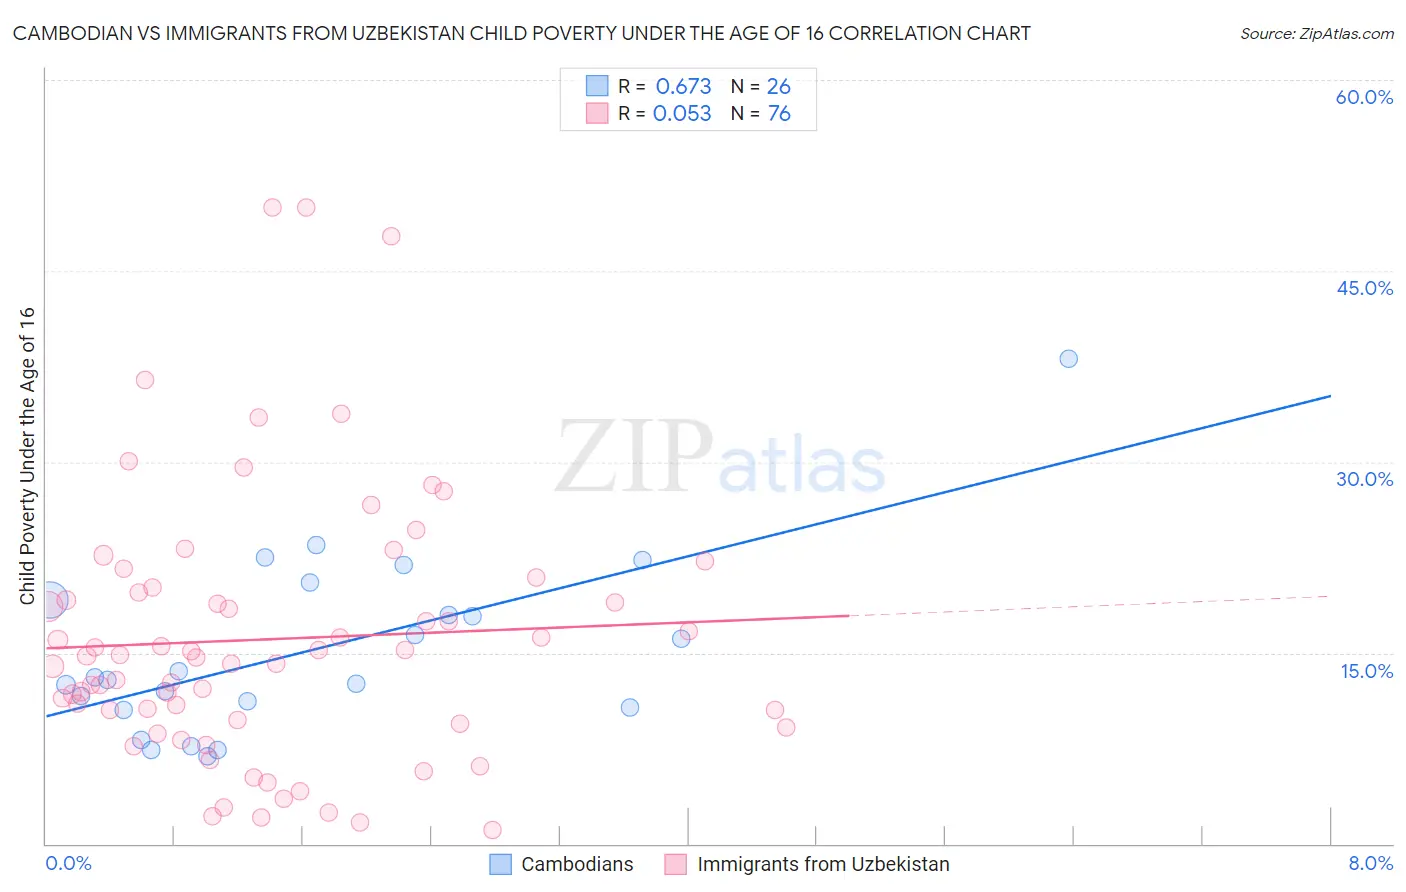 Cambodian vs Immigrants from Uzbekistan Child Poverty Under the Age of 16